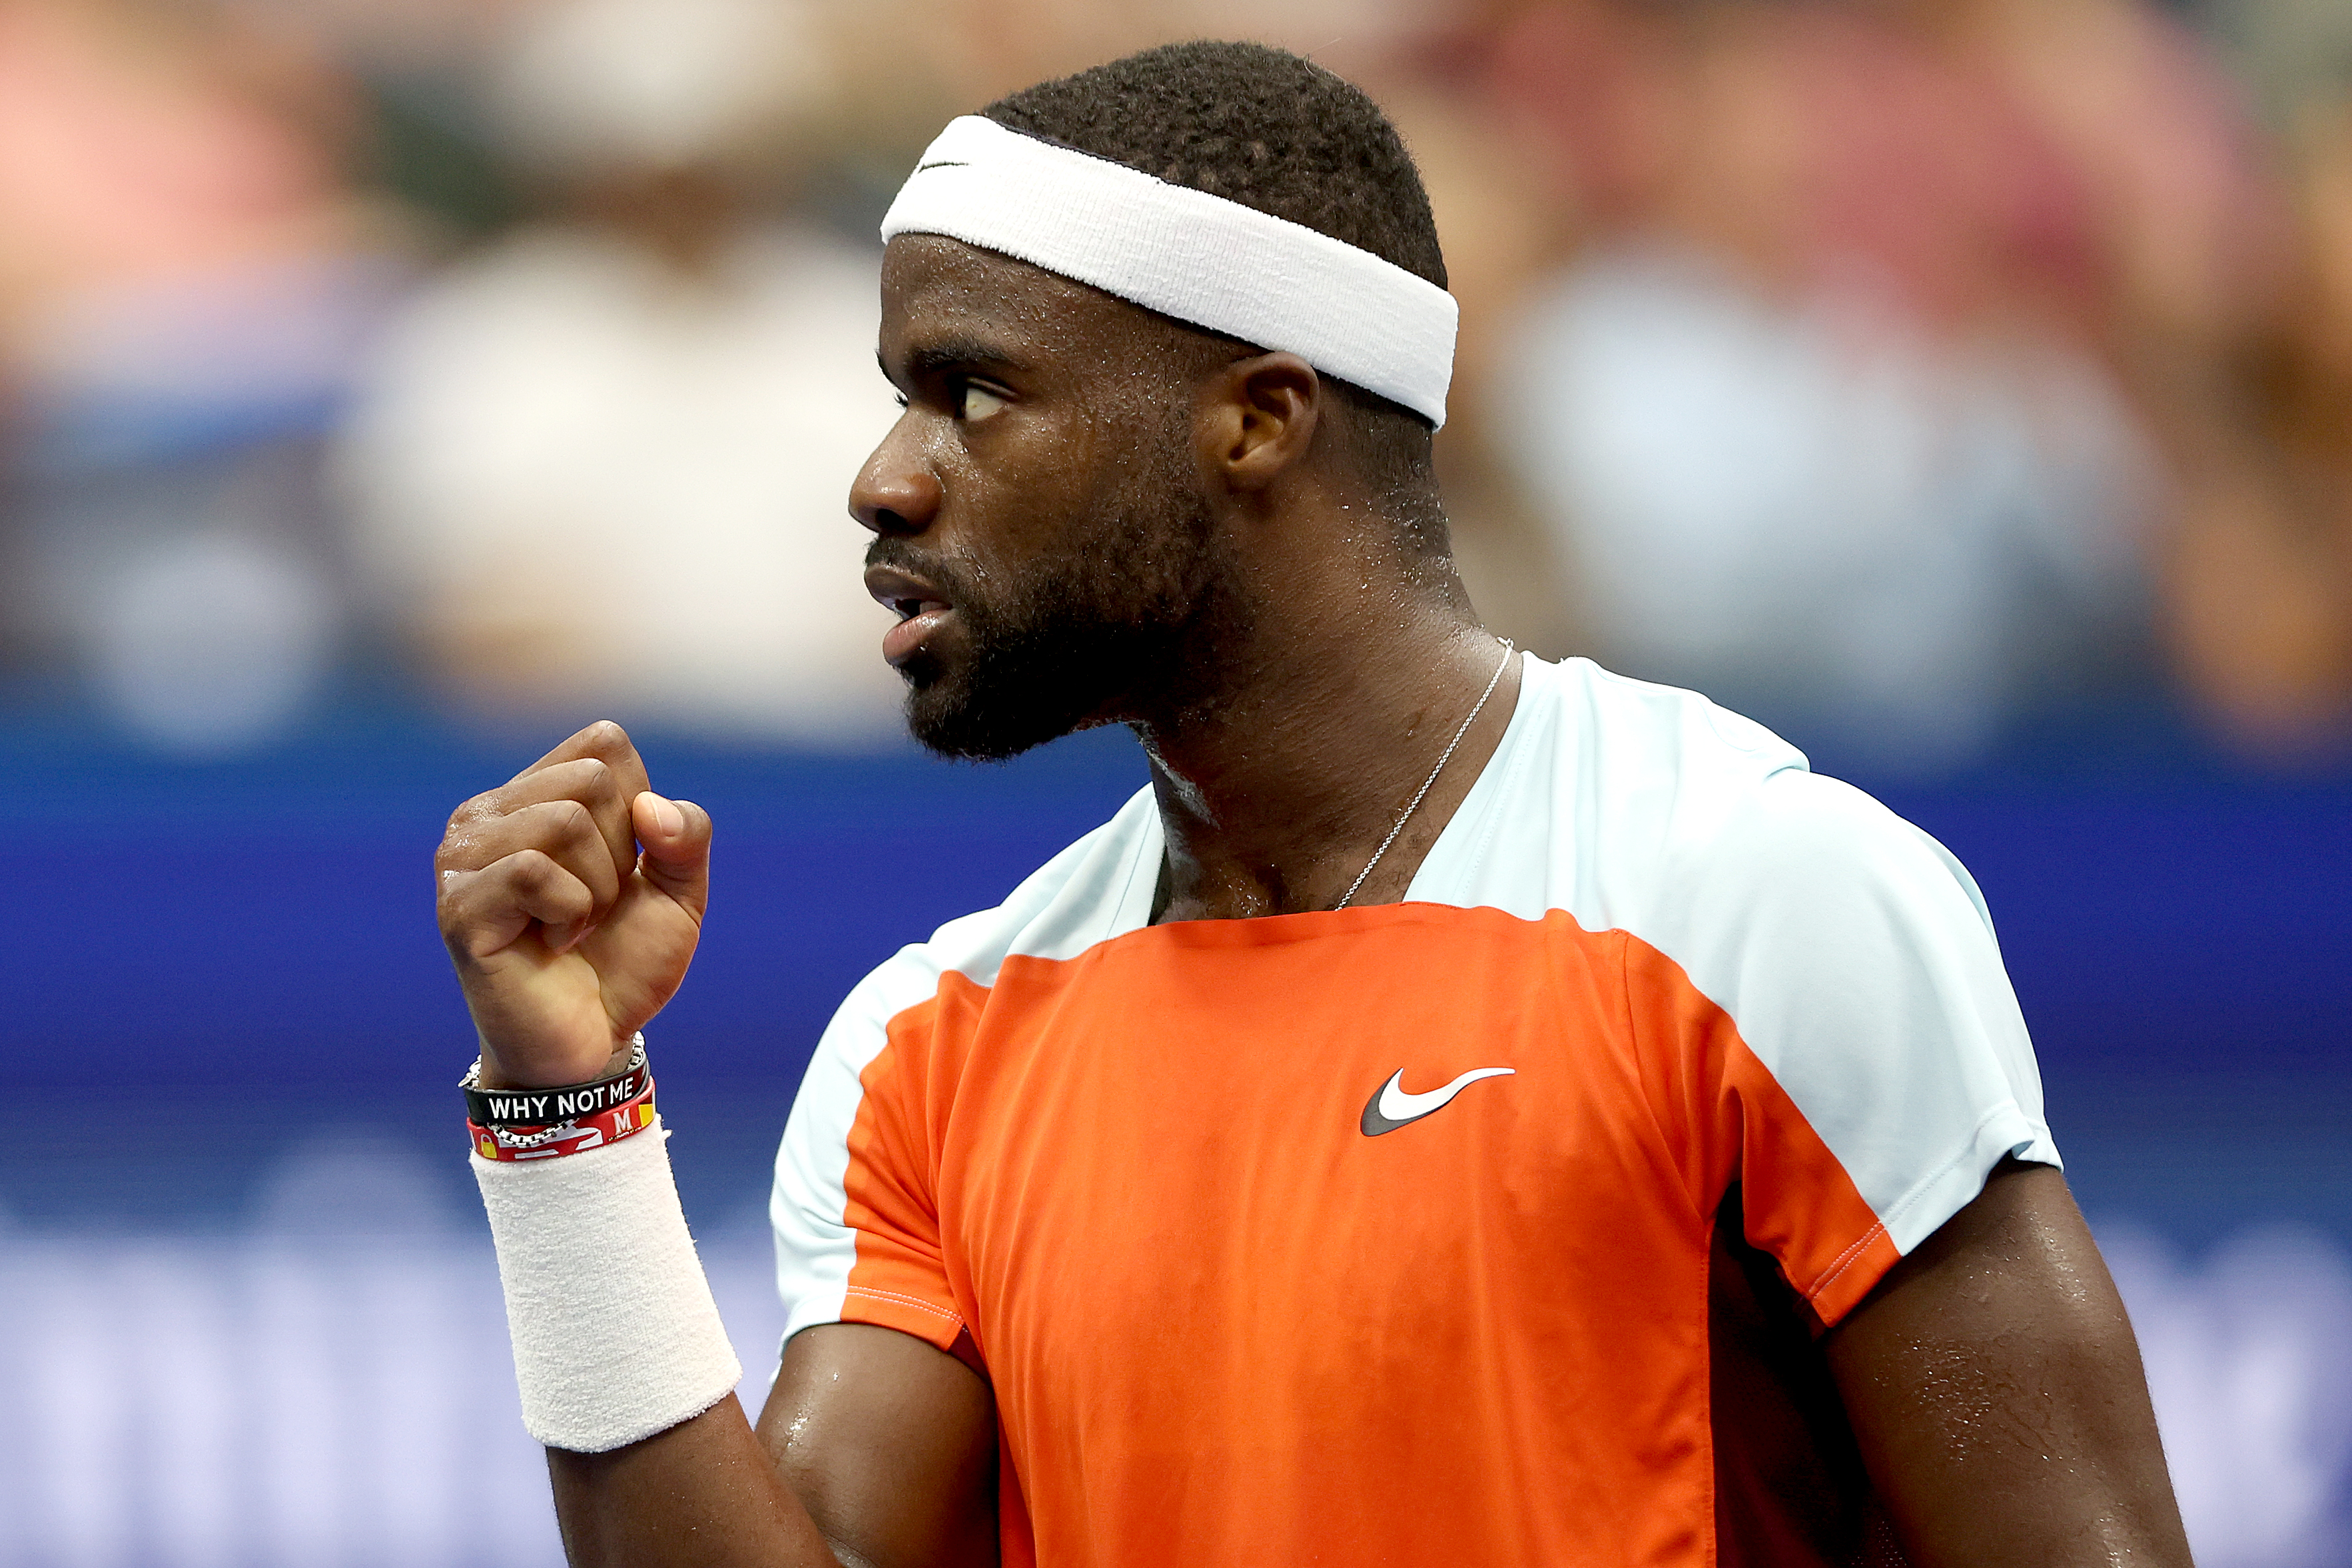 Frances Tiafoe of the United States celebrates a point against Andrey Rublev during their Men’s Singles Quarterfinal match on Day Ten of the 2022 US Open at USTA Billie Jean King National Tennis Center on September 07, 2022 in New York City. (Matthew Stockman—Getty Images)